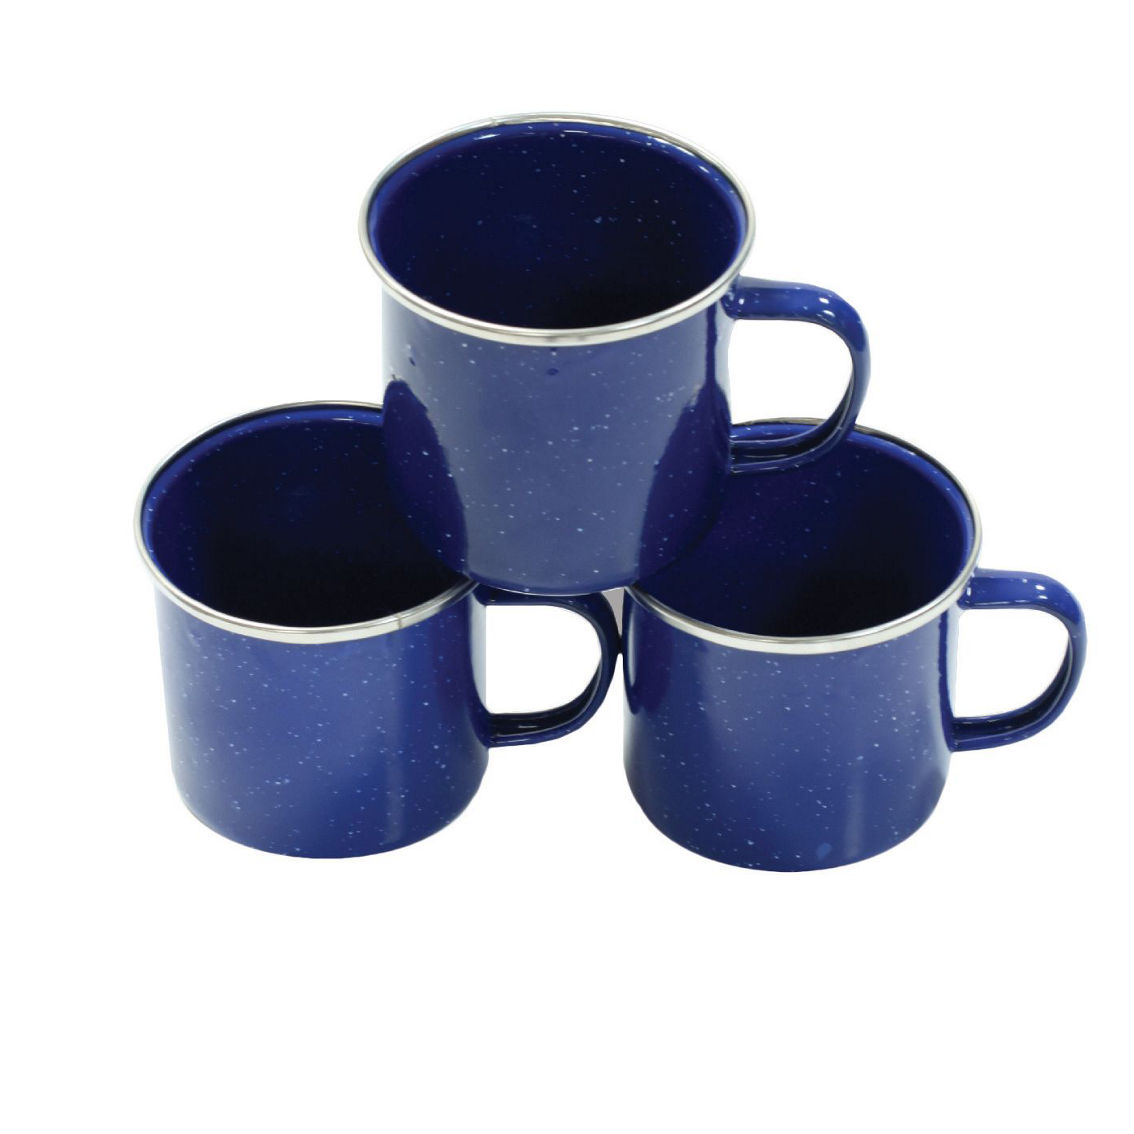 Stansport 24 pc Deluxe Enamelware Set - Image 4 of 5